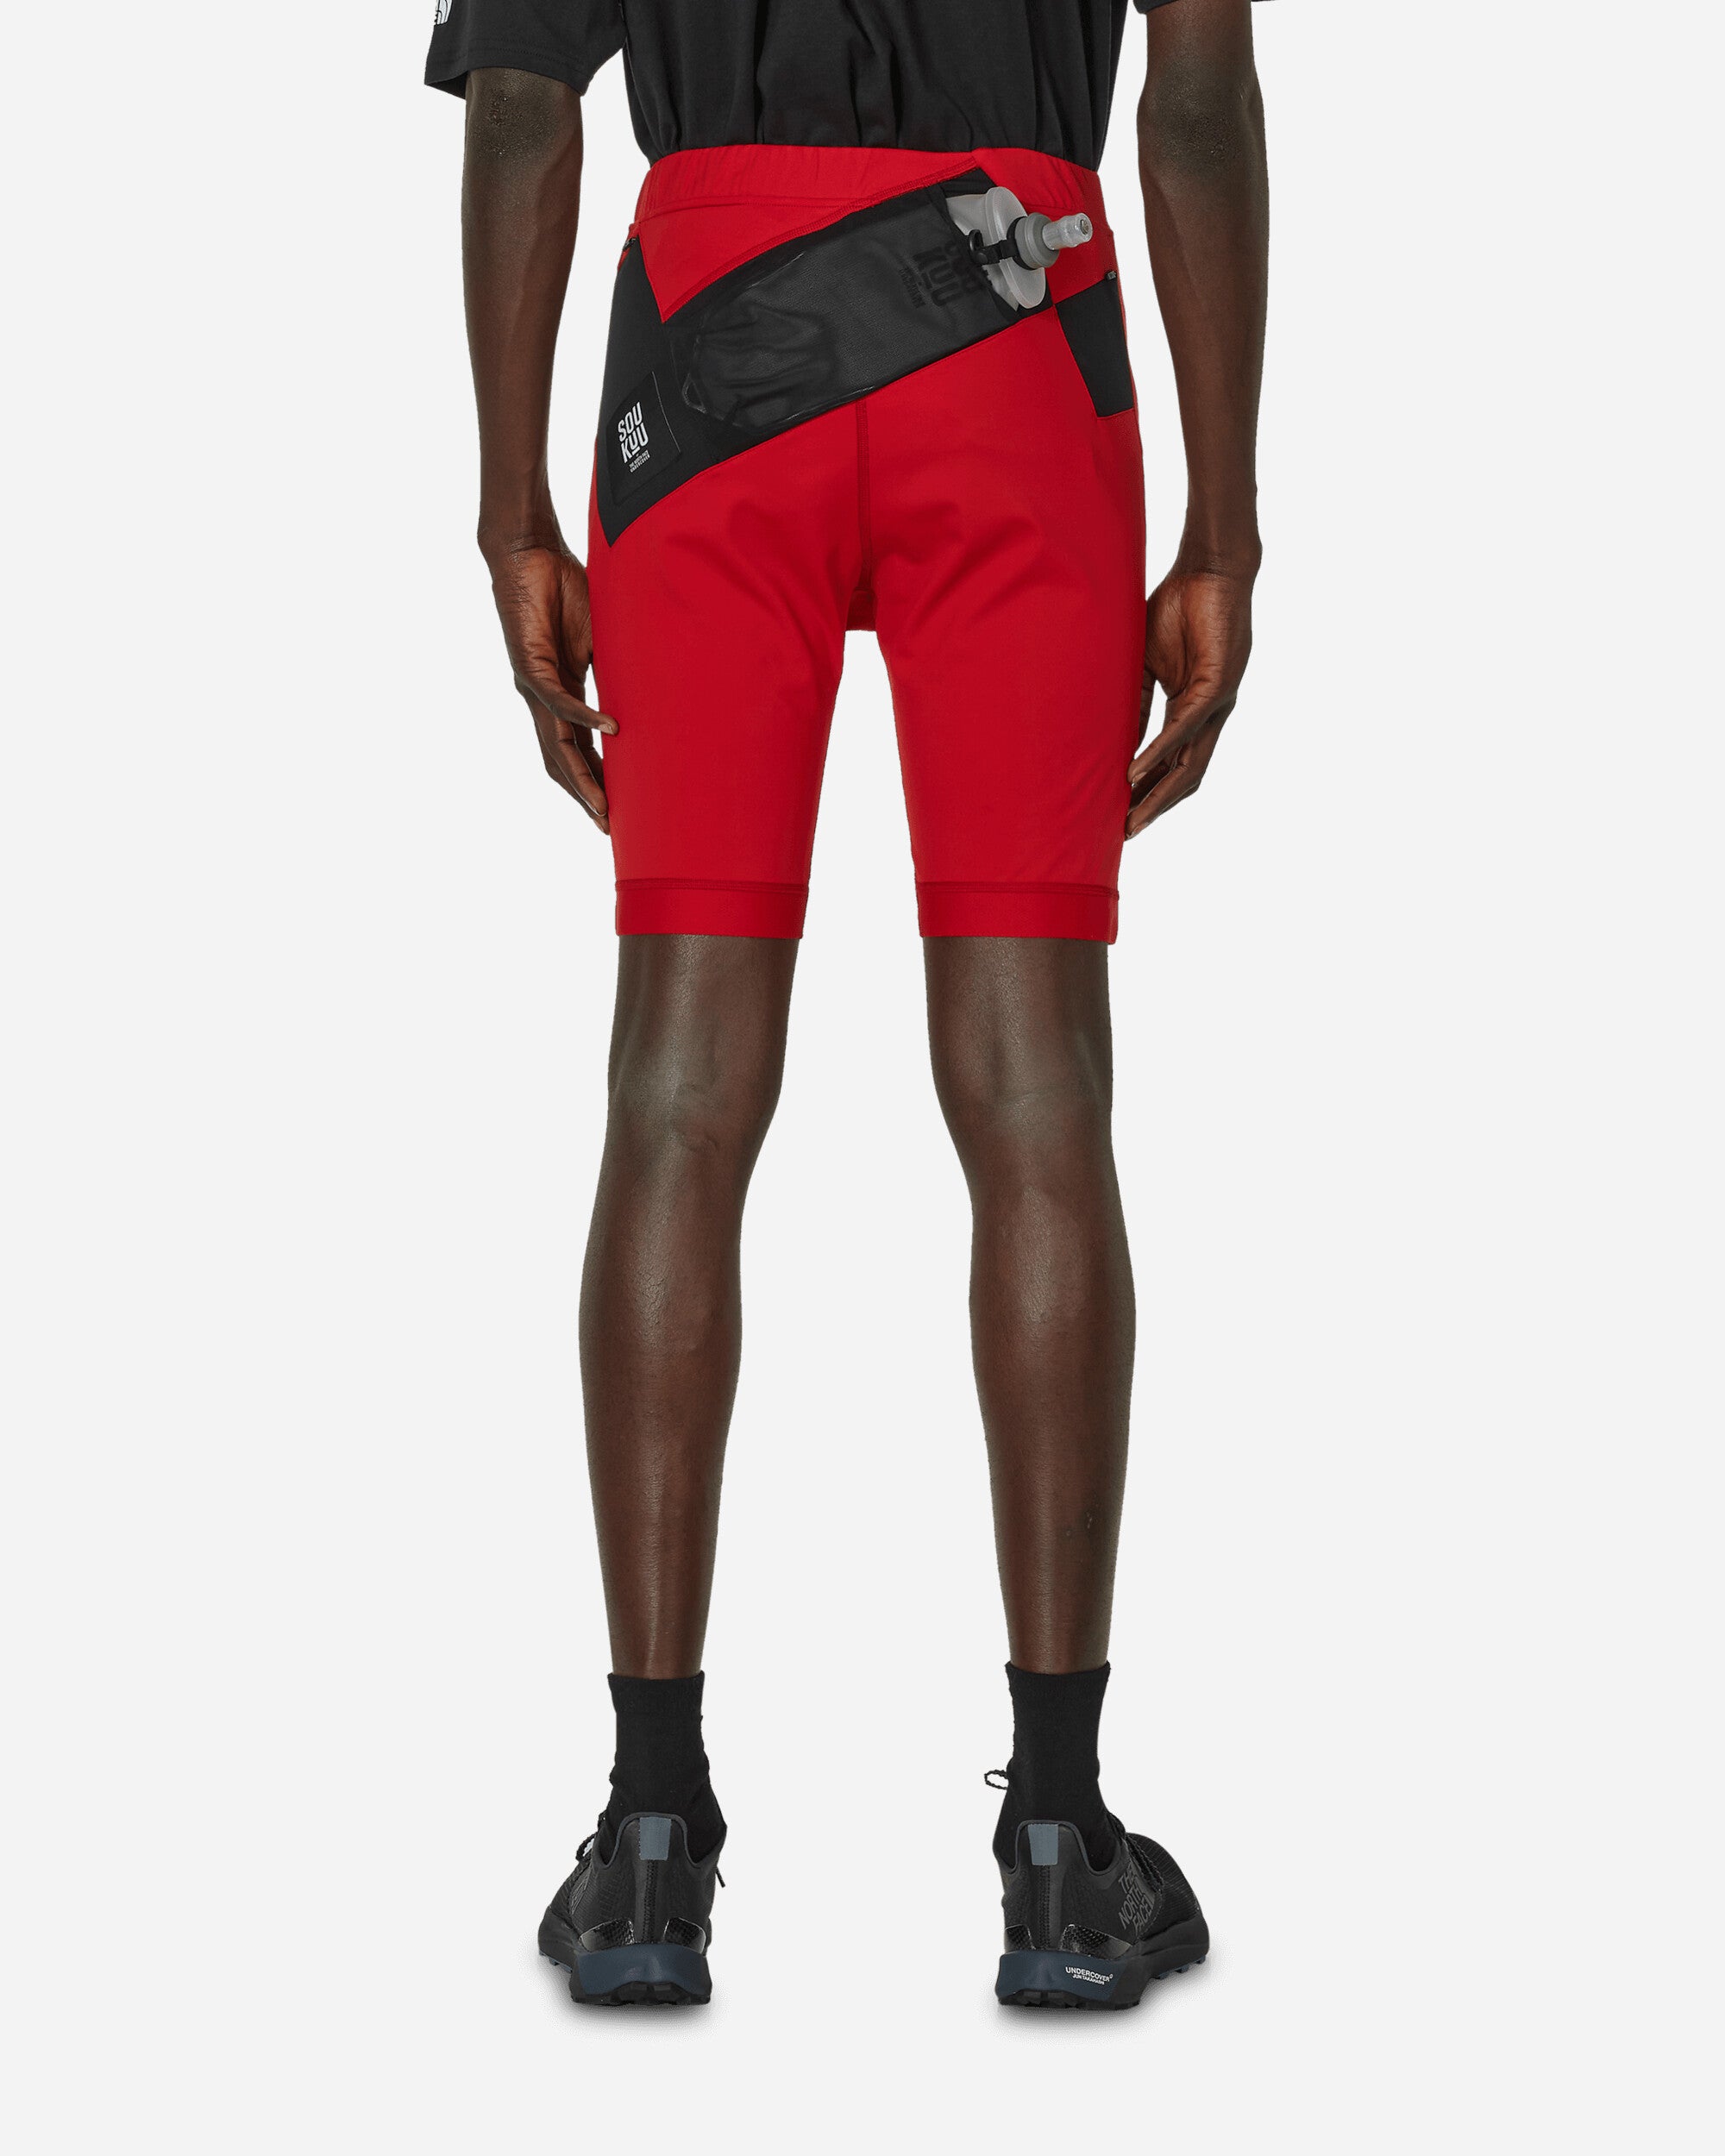 The North Face Project X Tnf X Project U Performance Short Tight Chili Pepper Red-TNF Black Shorts Short NF0A87UM VOL1